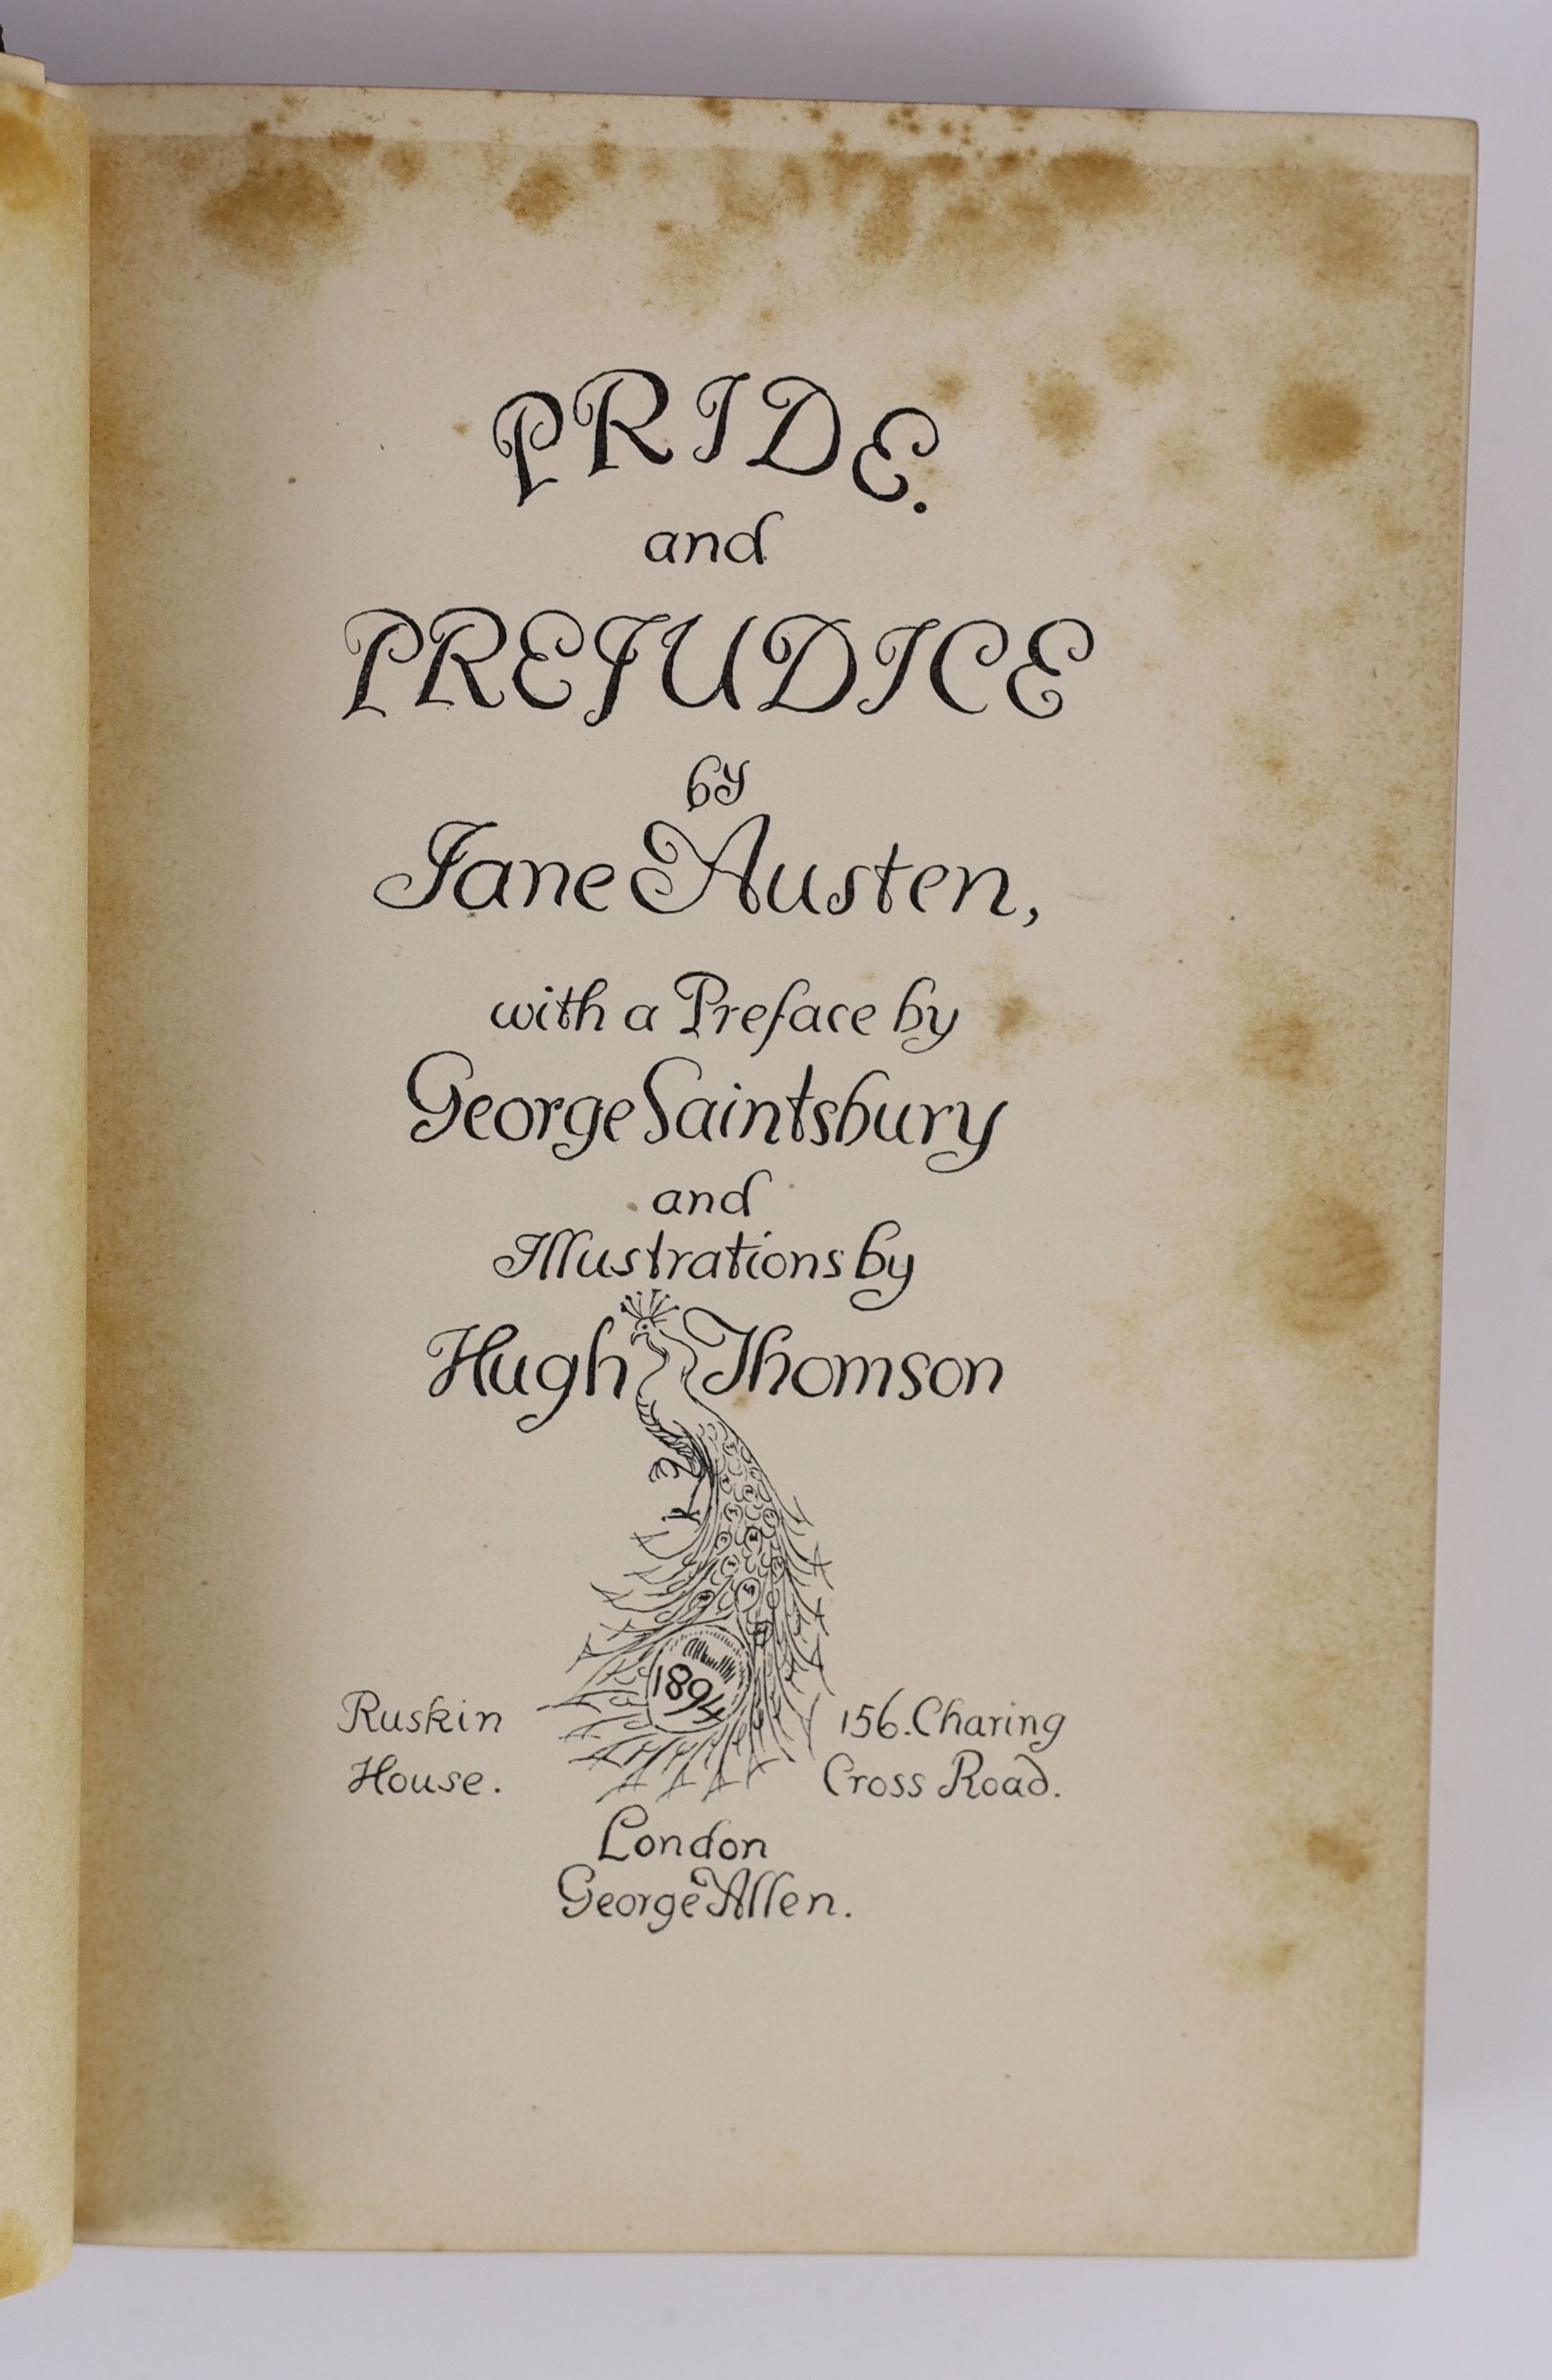 Austen, Jane - Pride and Prejudice... with a preface by George Sainsbury and illustrations by Hugh Thomson; dark blue / green publisher's cloth, upper cover and spine gilt overall in the 'Peacock' design, ge. and dark bl